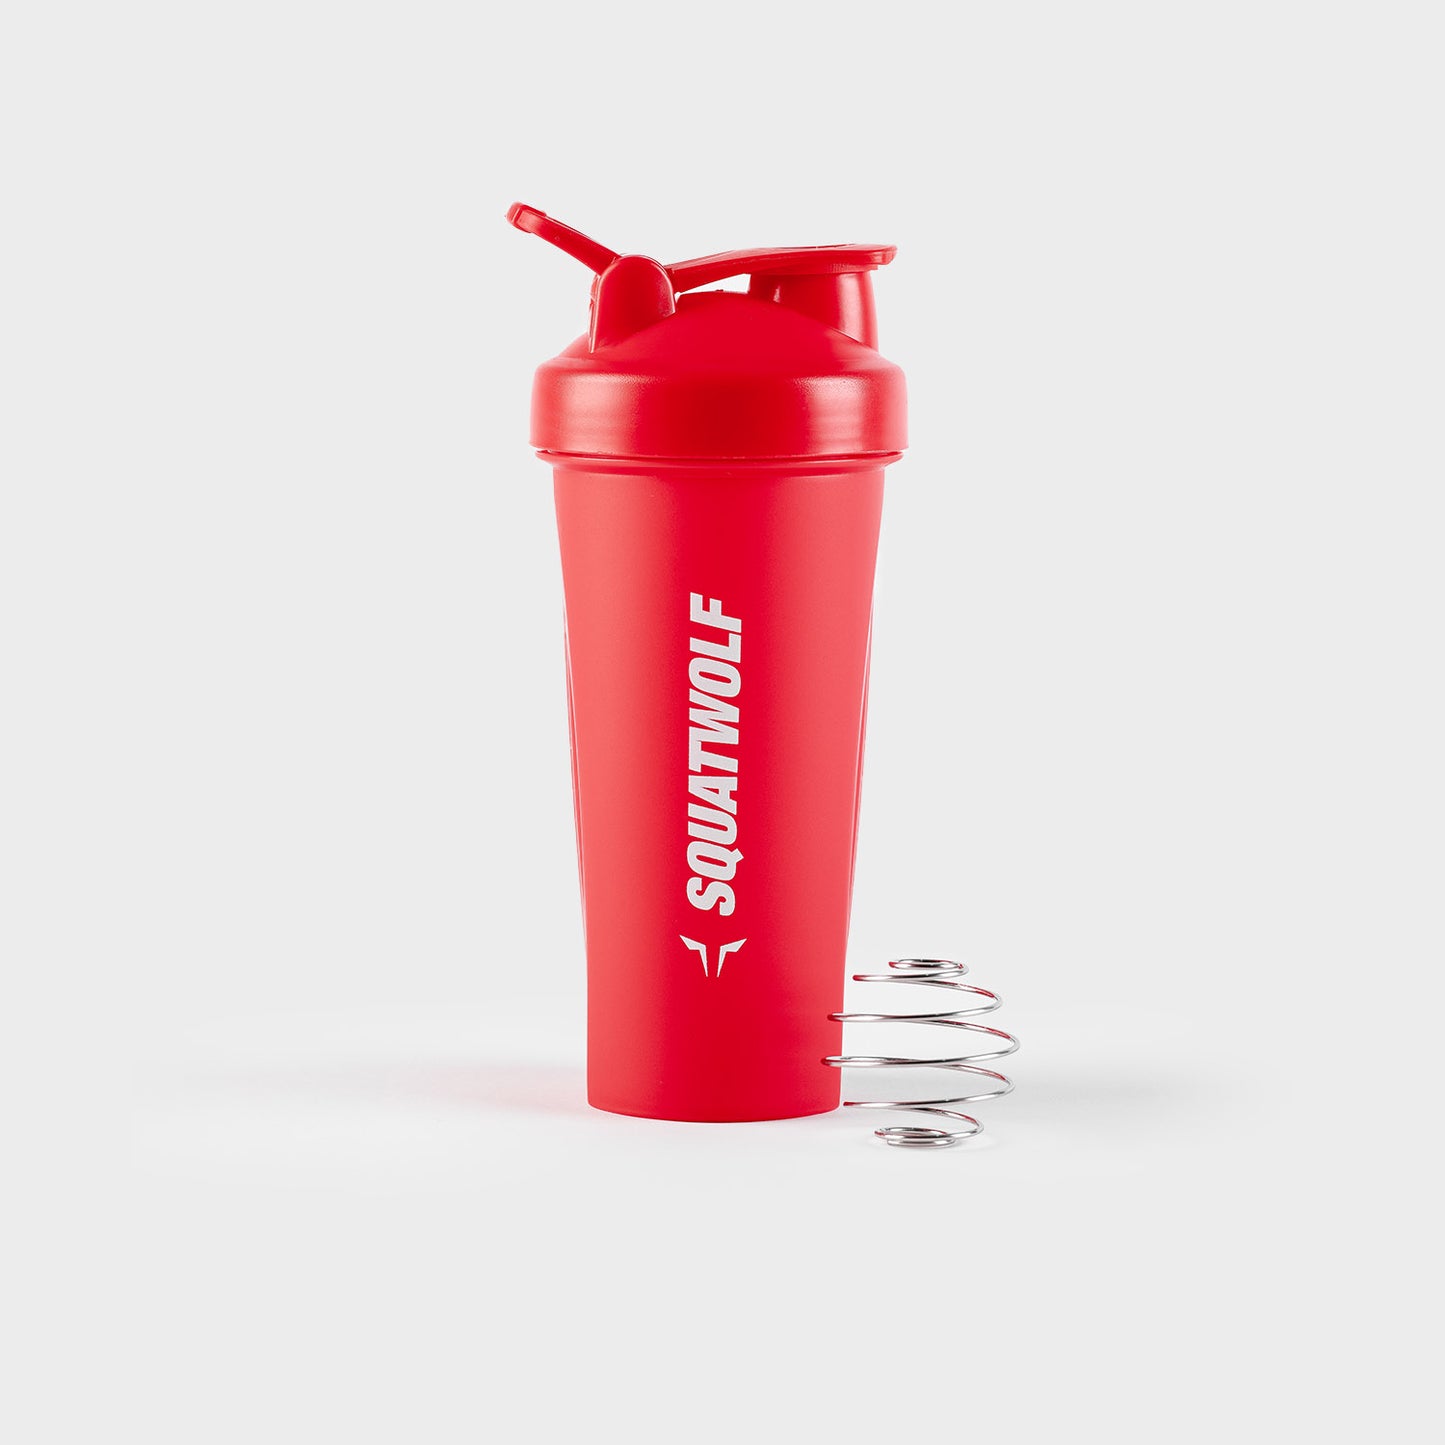 squatwolf-gym-wear-protein-shaker-red-workout